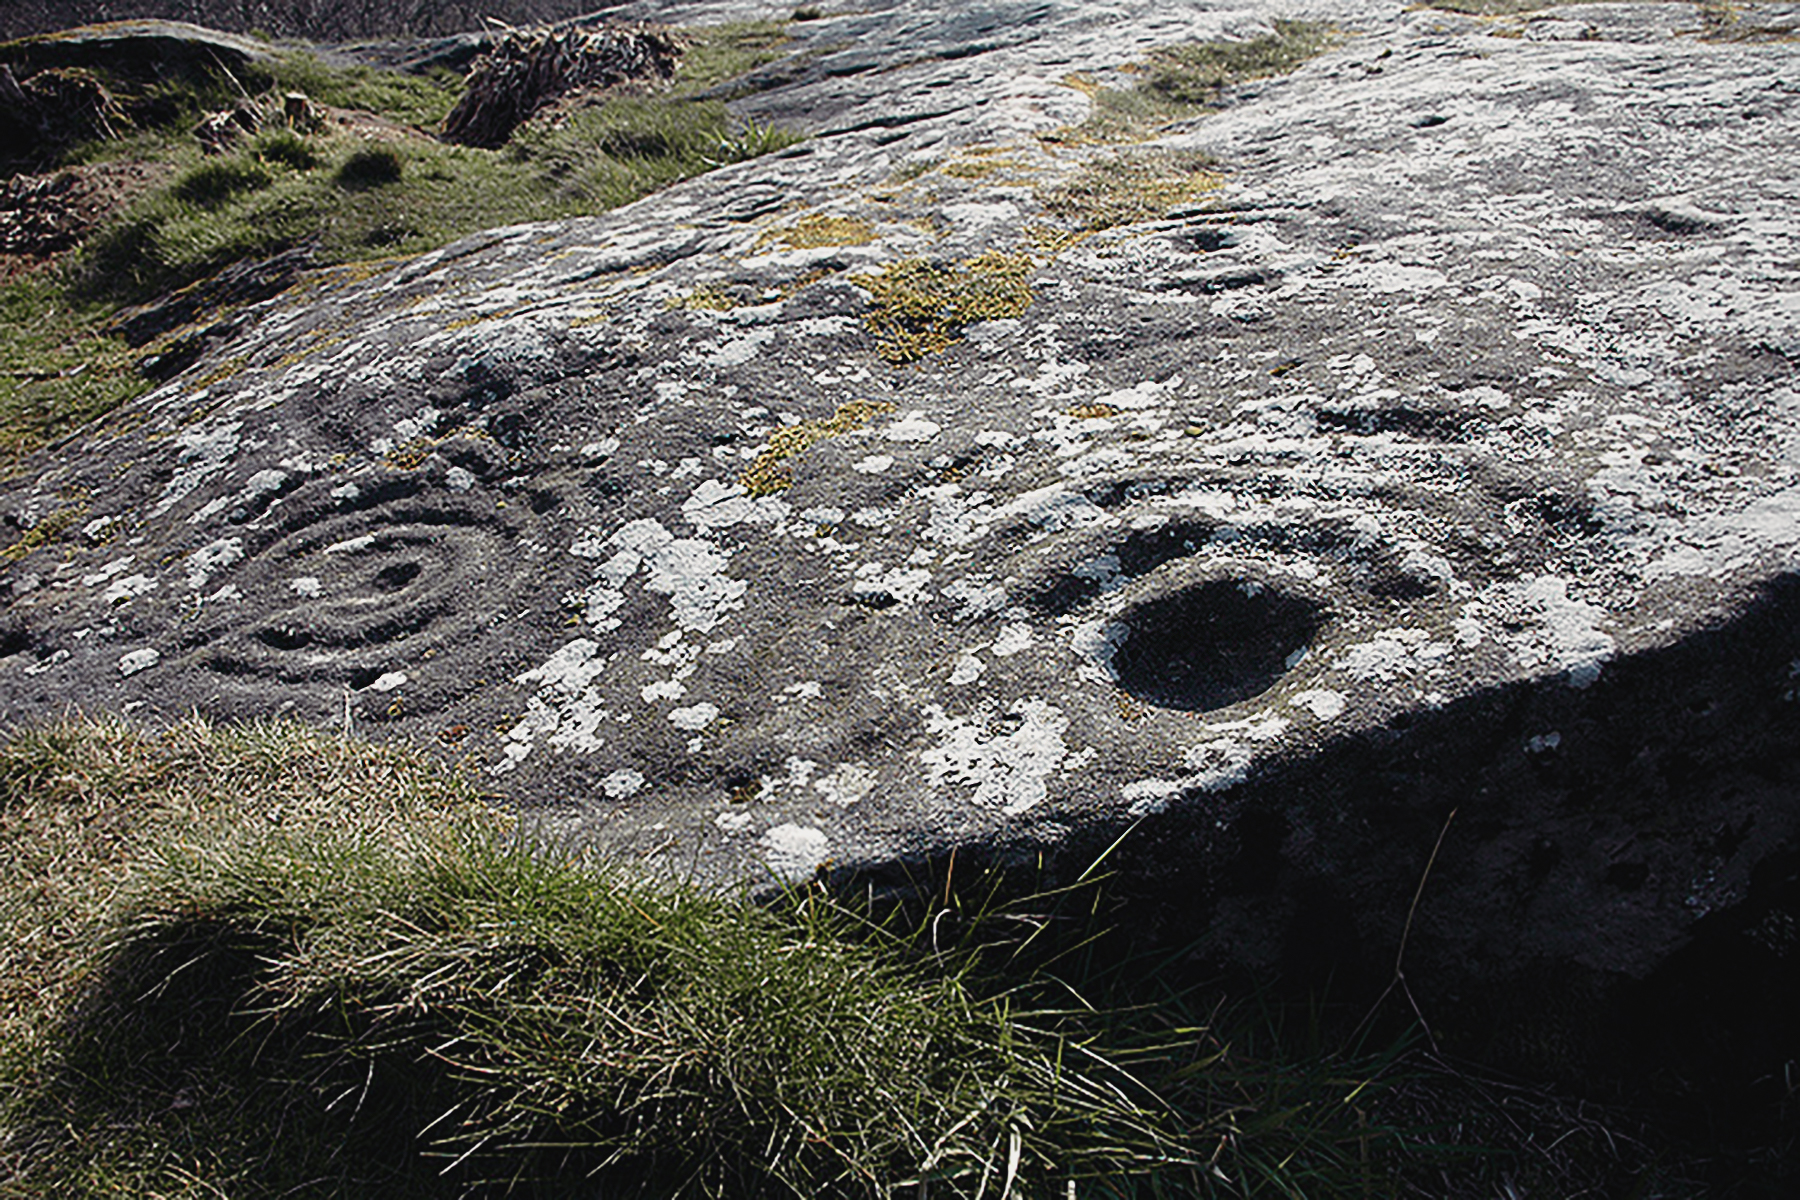 Prehistoric open-air cup and ring rock carvings from Northumberland